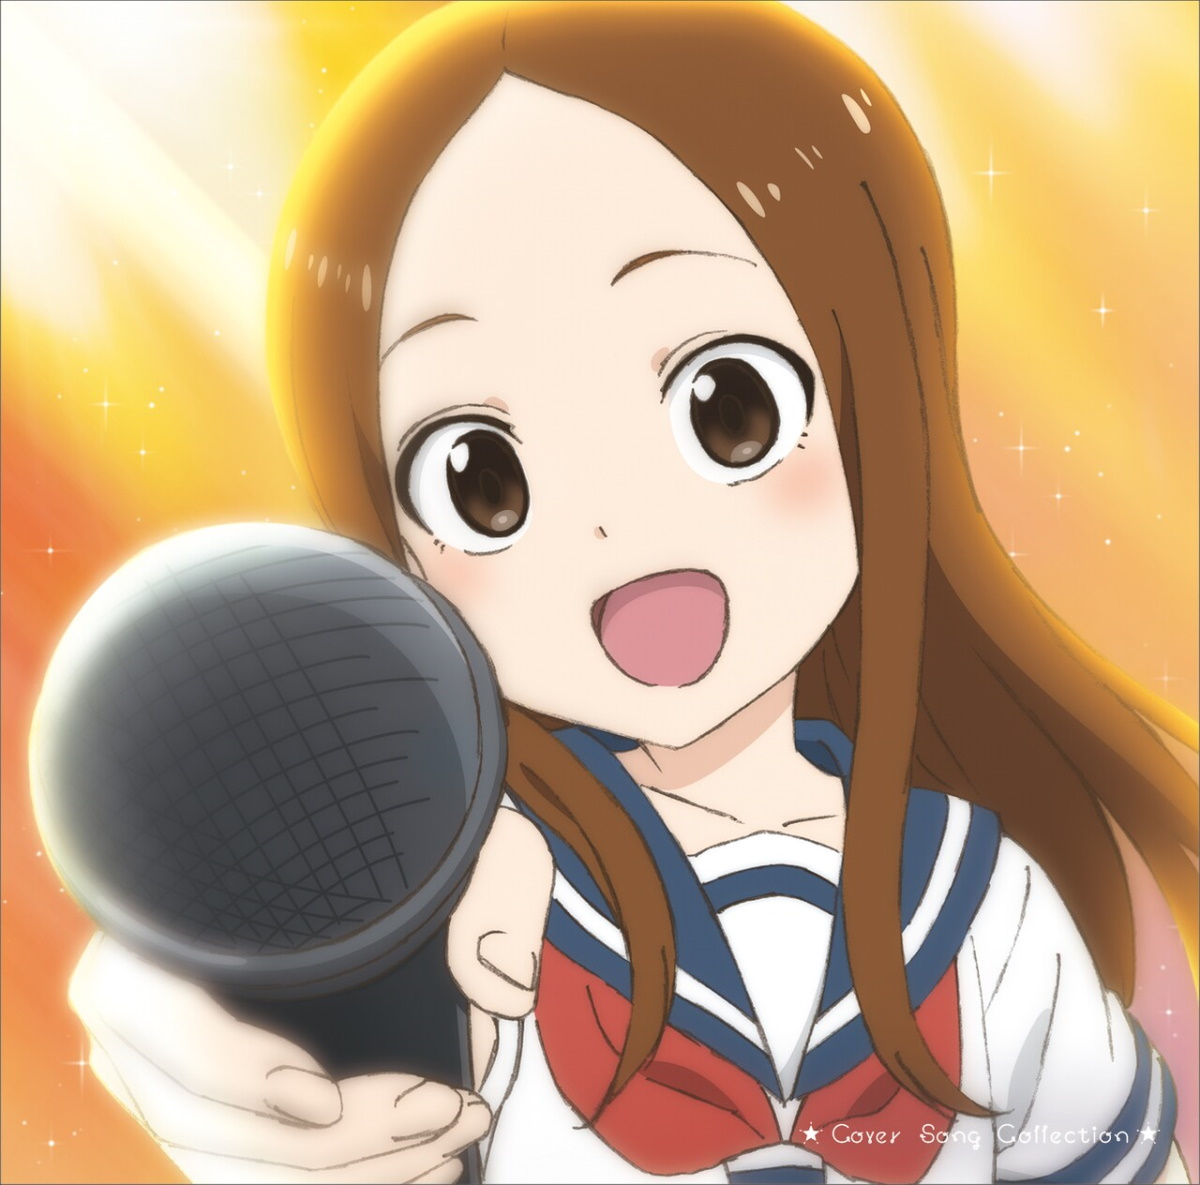 Cover art for『Takagi-san (Rie Takahashi) - 天体観測』from the release『